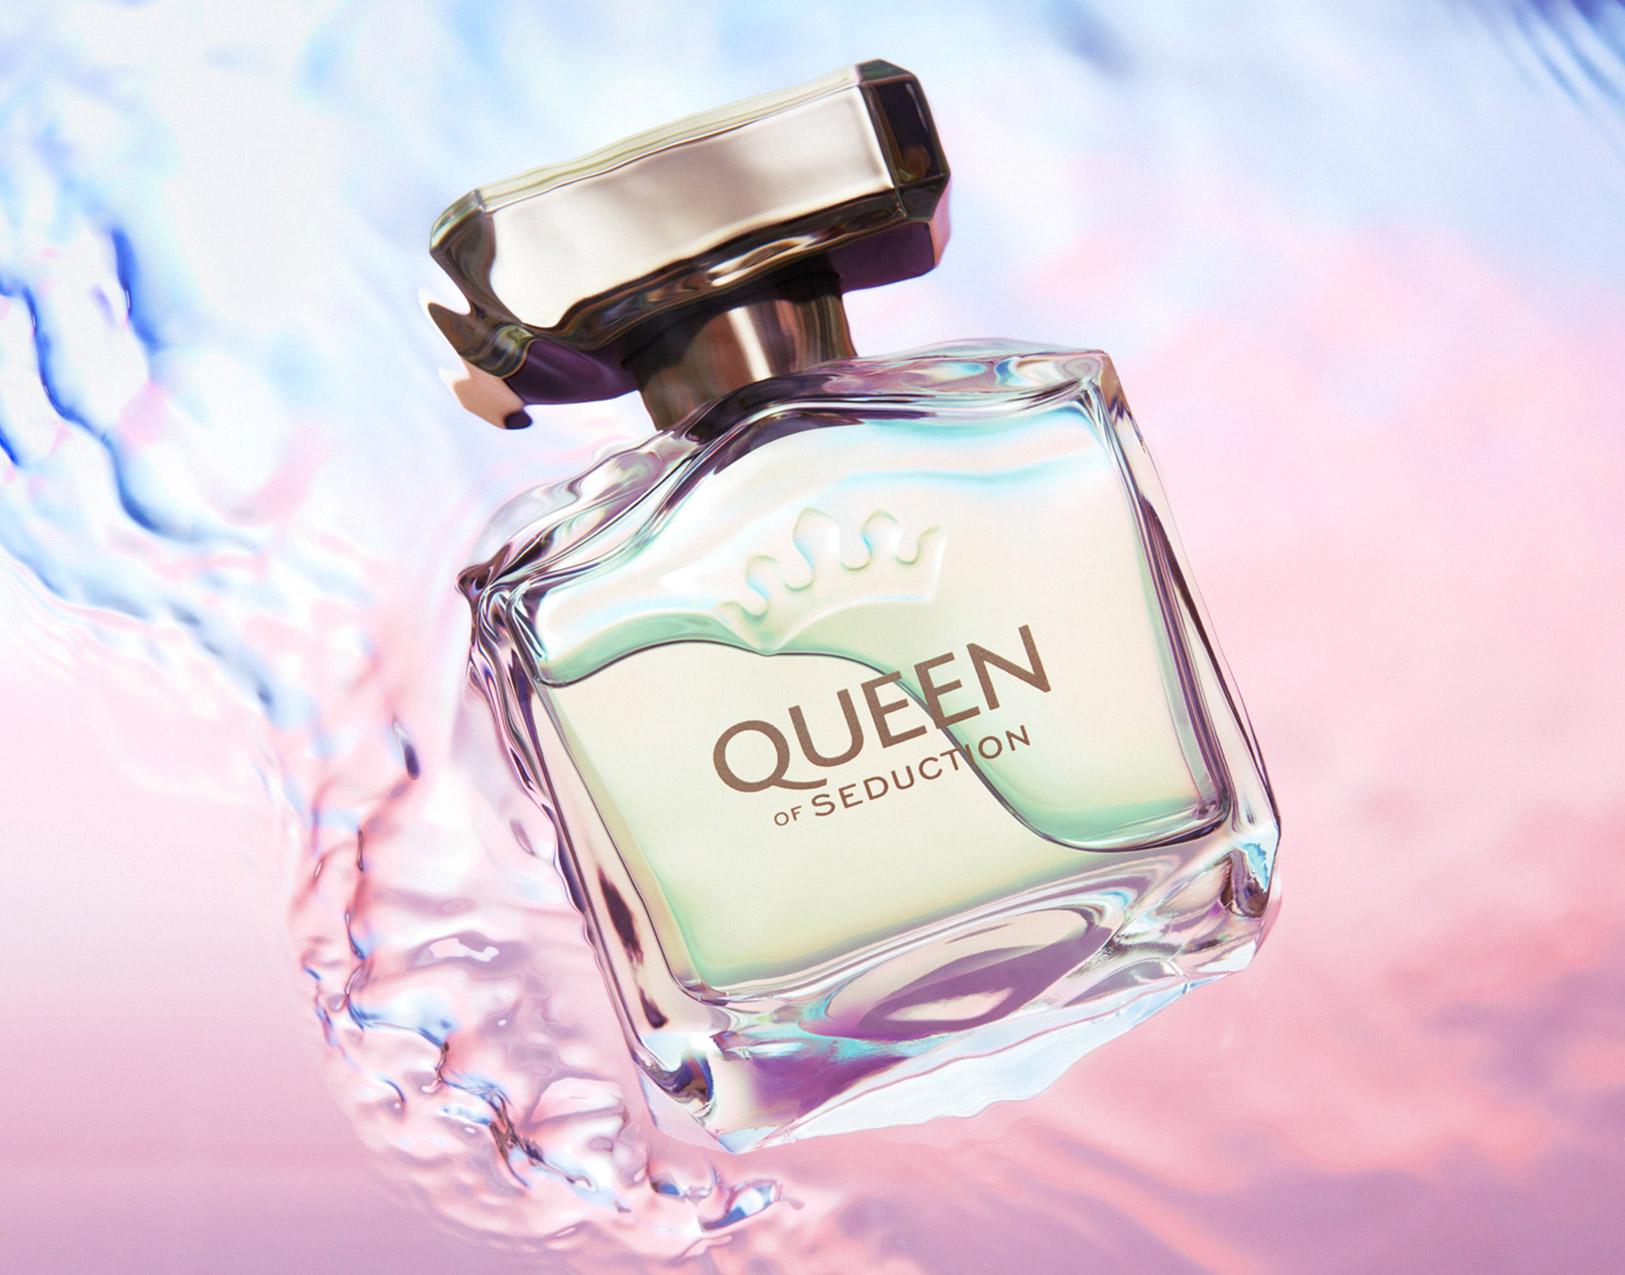 Queen of Seduction fragrance for her by Banderas